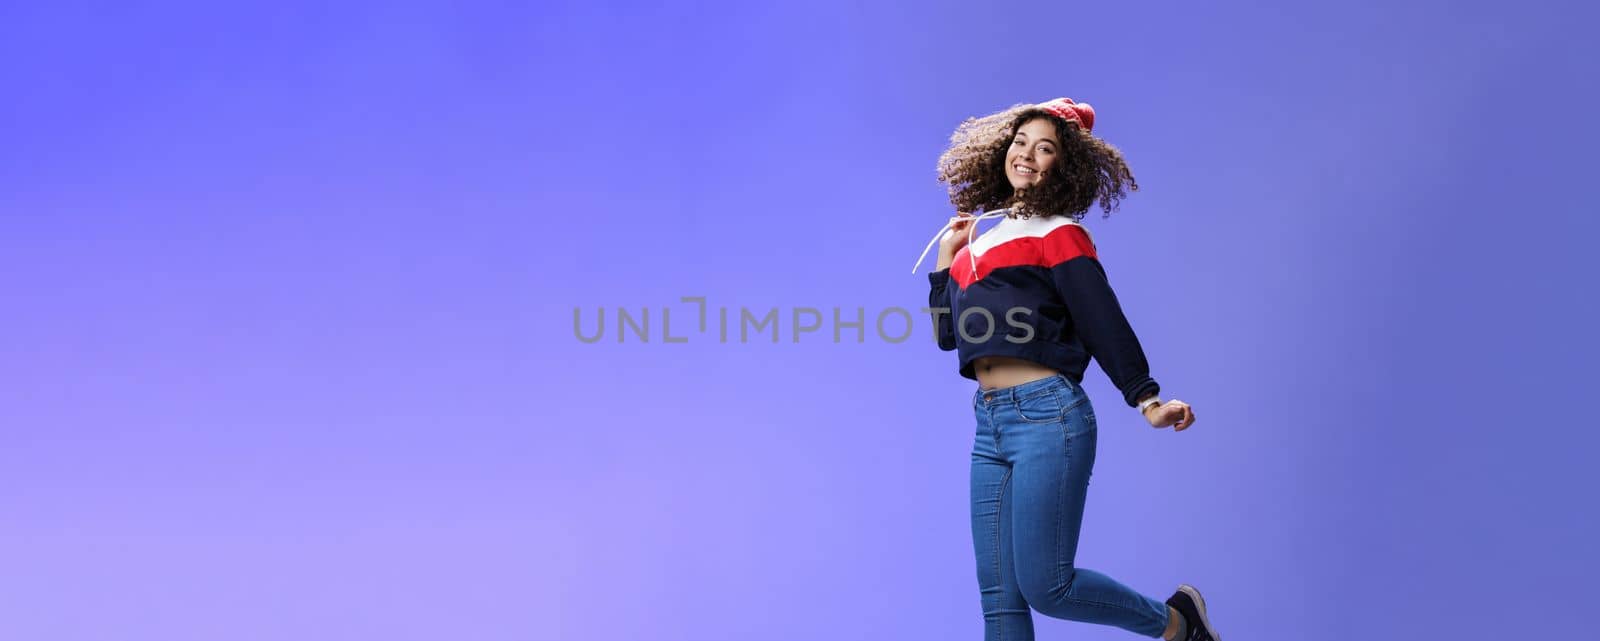 Dreamy and femenine cute girl with curly hair in winter beanie, jeans and sweatshirt jumping over blue background with satisfied carefree smile looking at camera feeling light and joyful by Benzoix